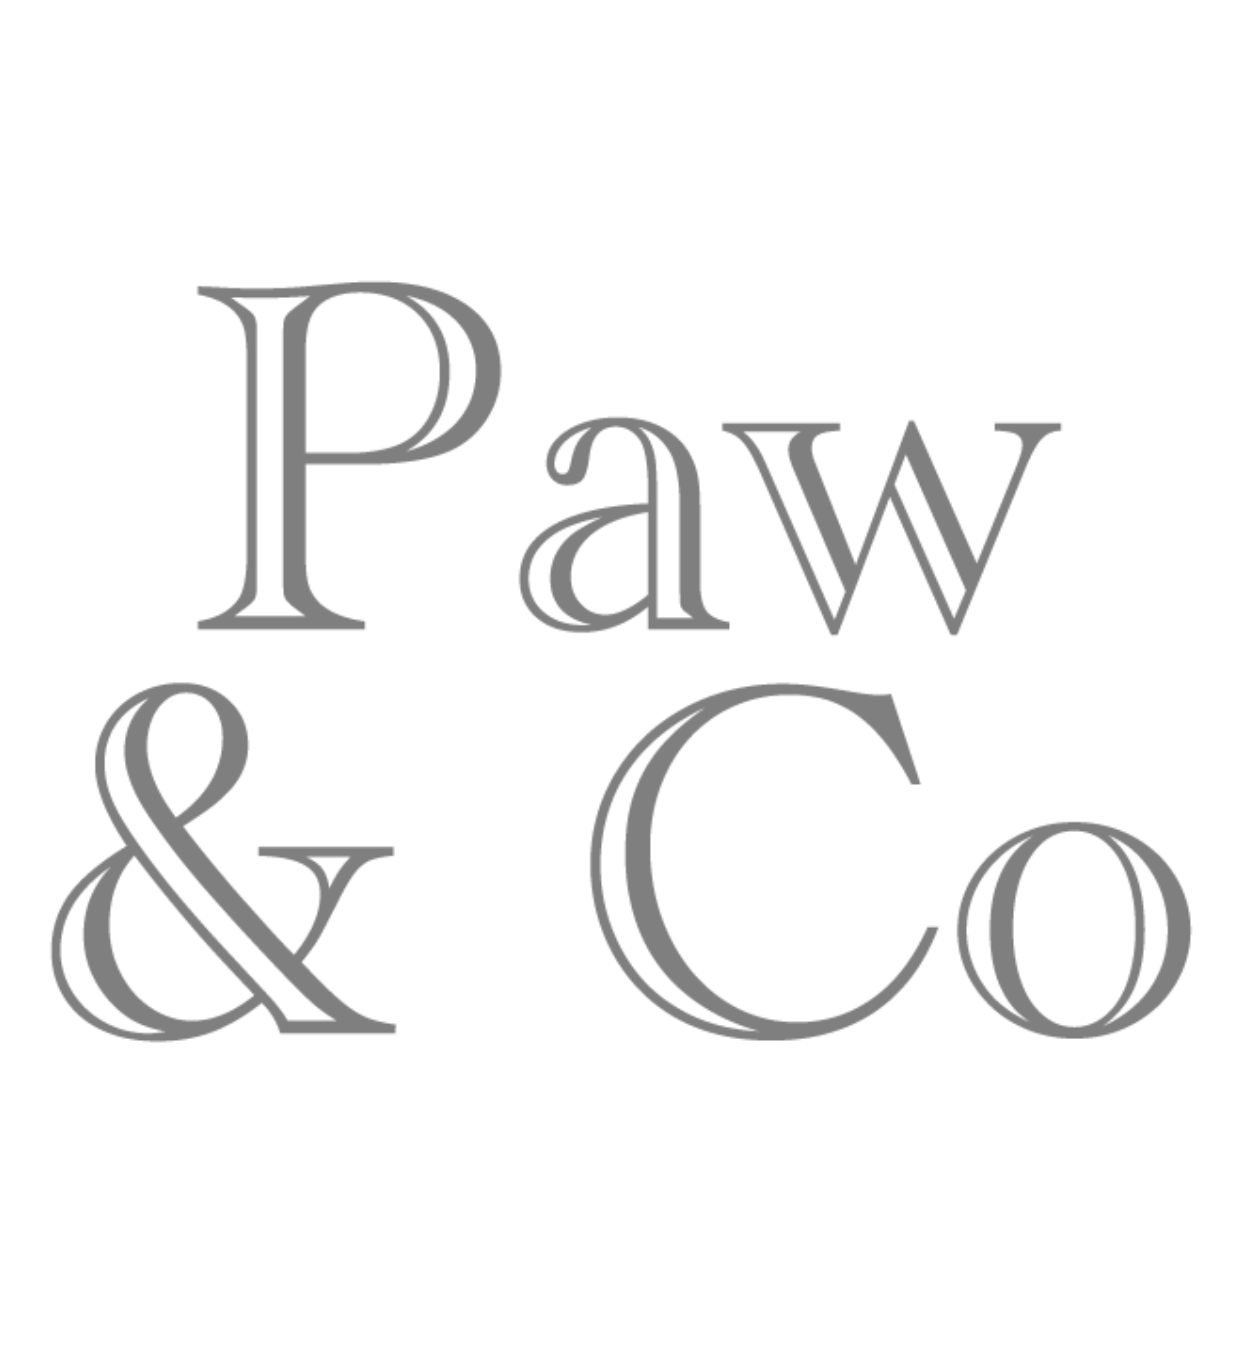 Paw & Co